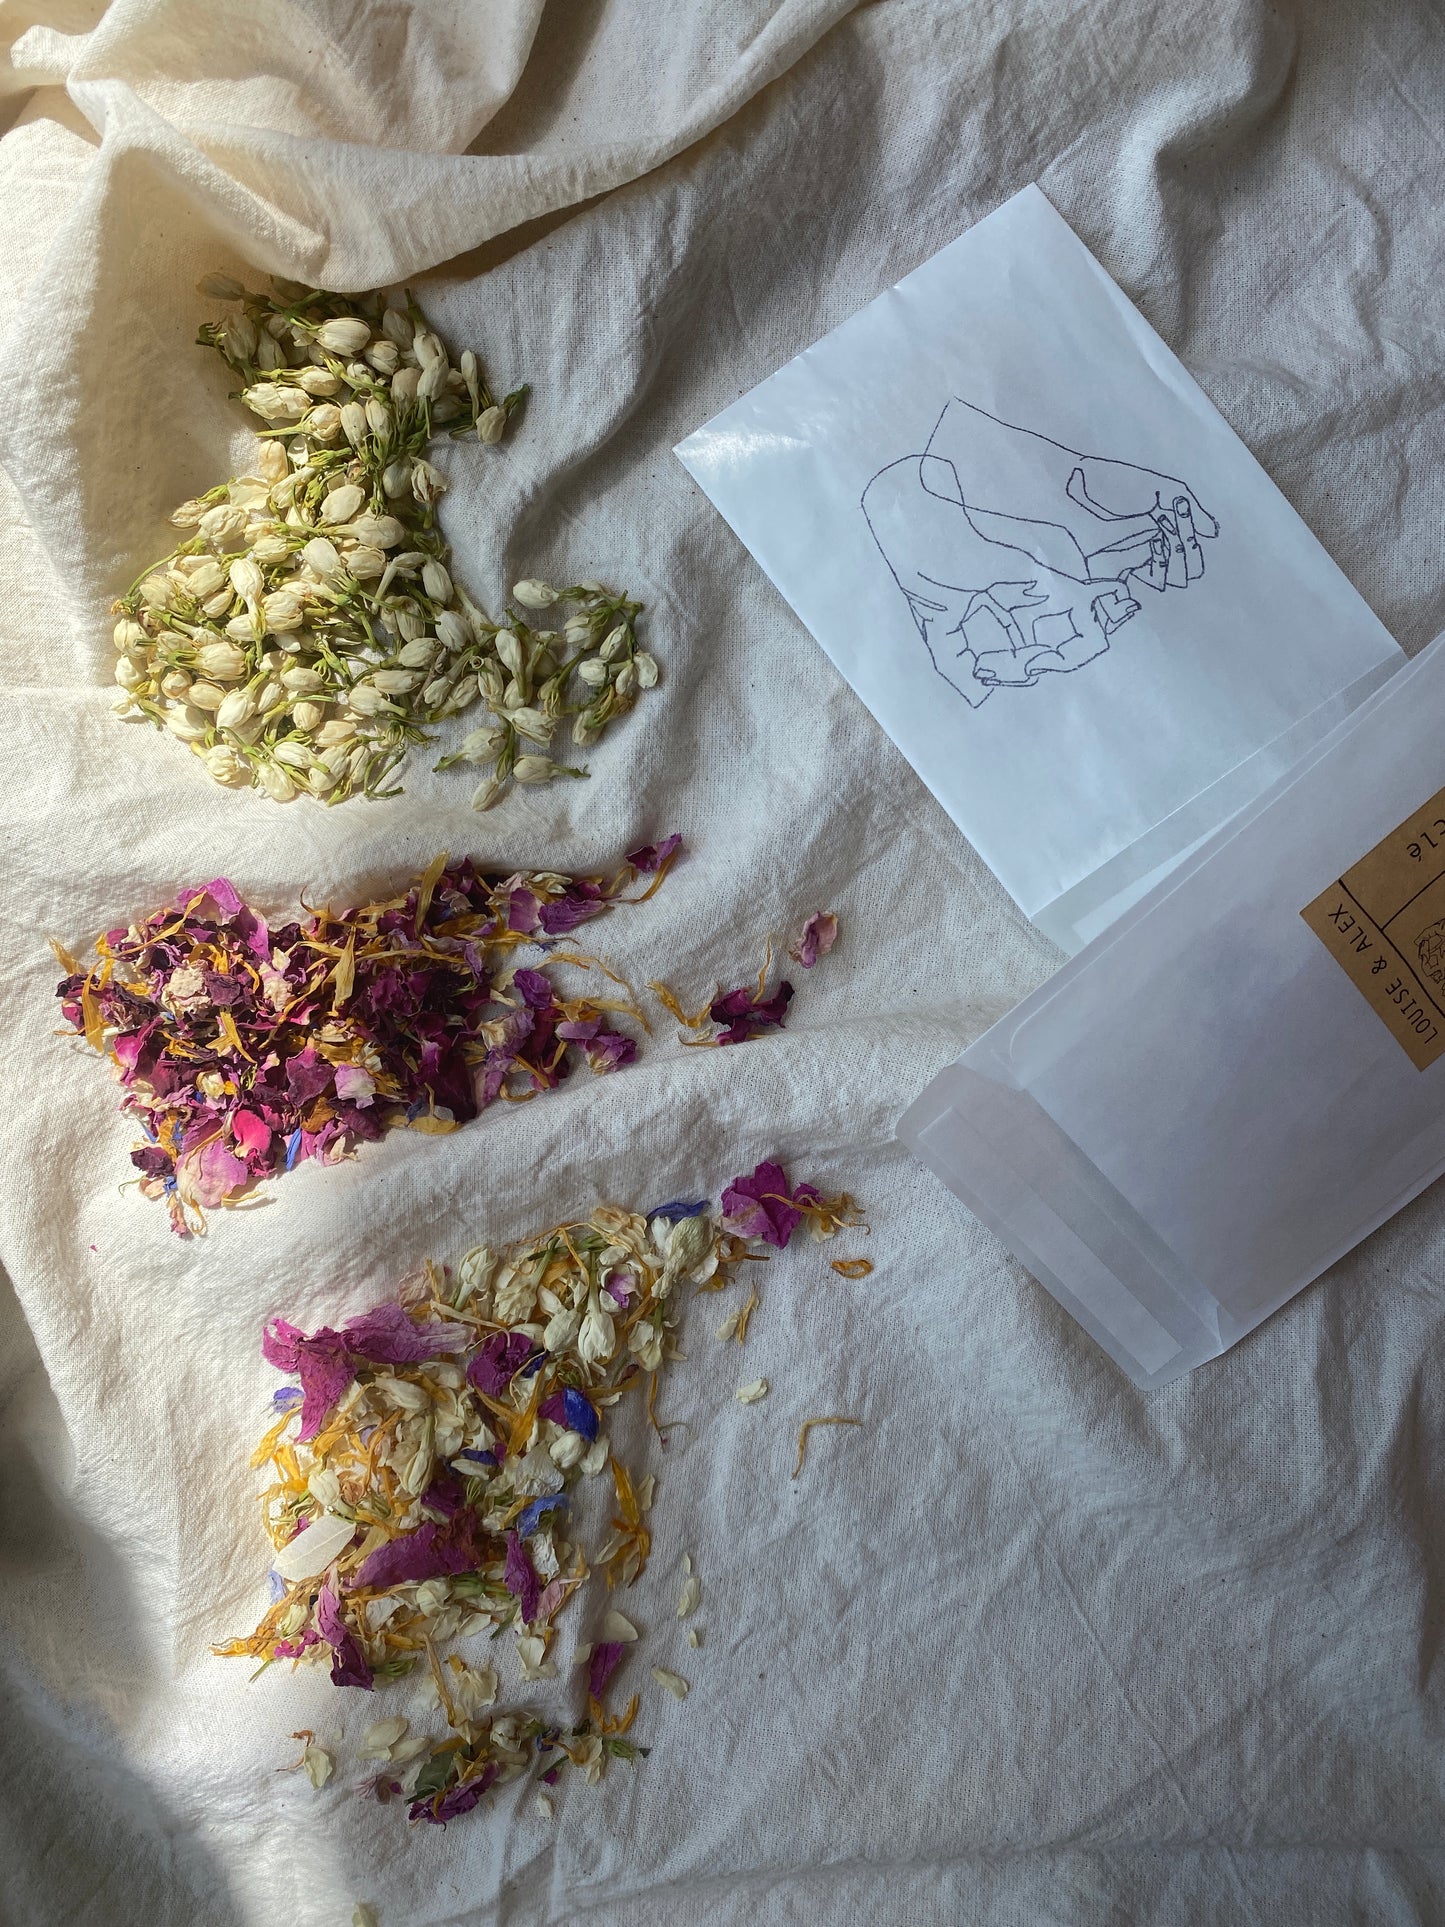 Three varieties of dried flower petal confetti for wedding styling. There is a vibrant multi coloured, a muted rose blush and cream colour-way or a monochrome white jasmine bud. In personalised glassine pouches.